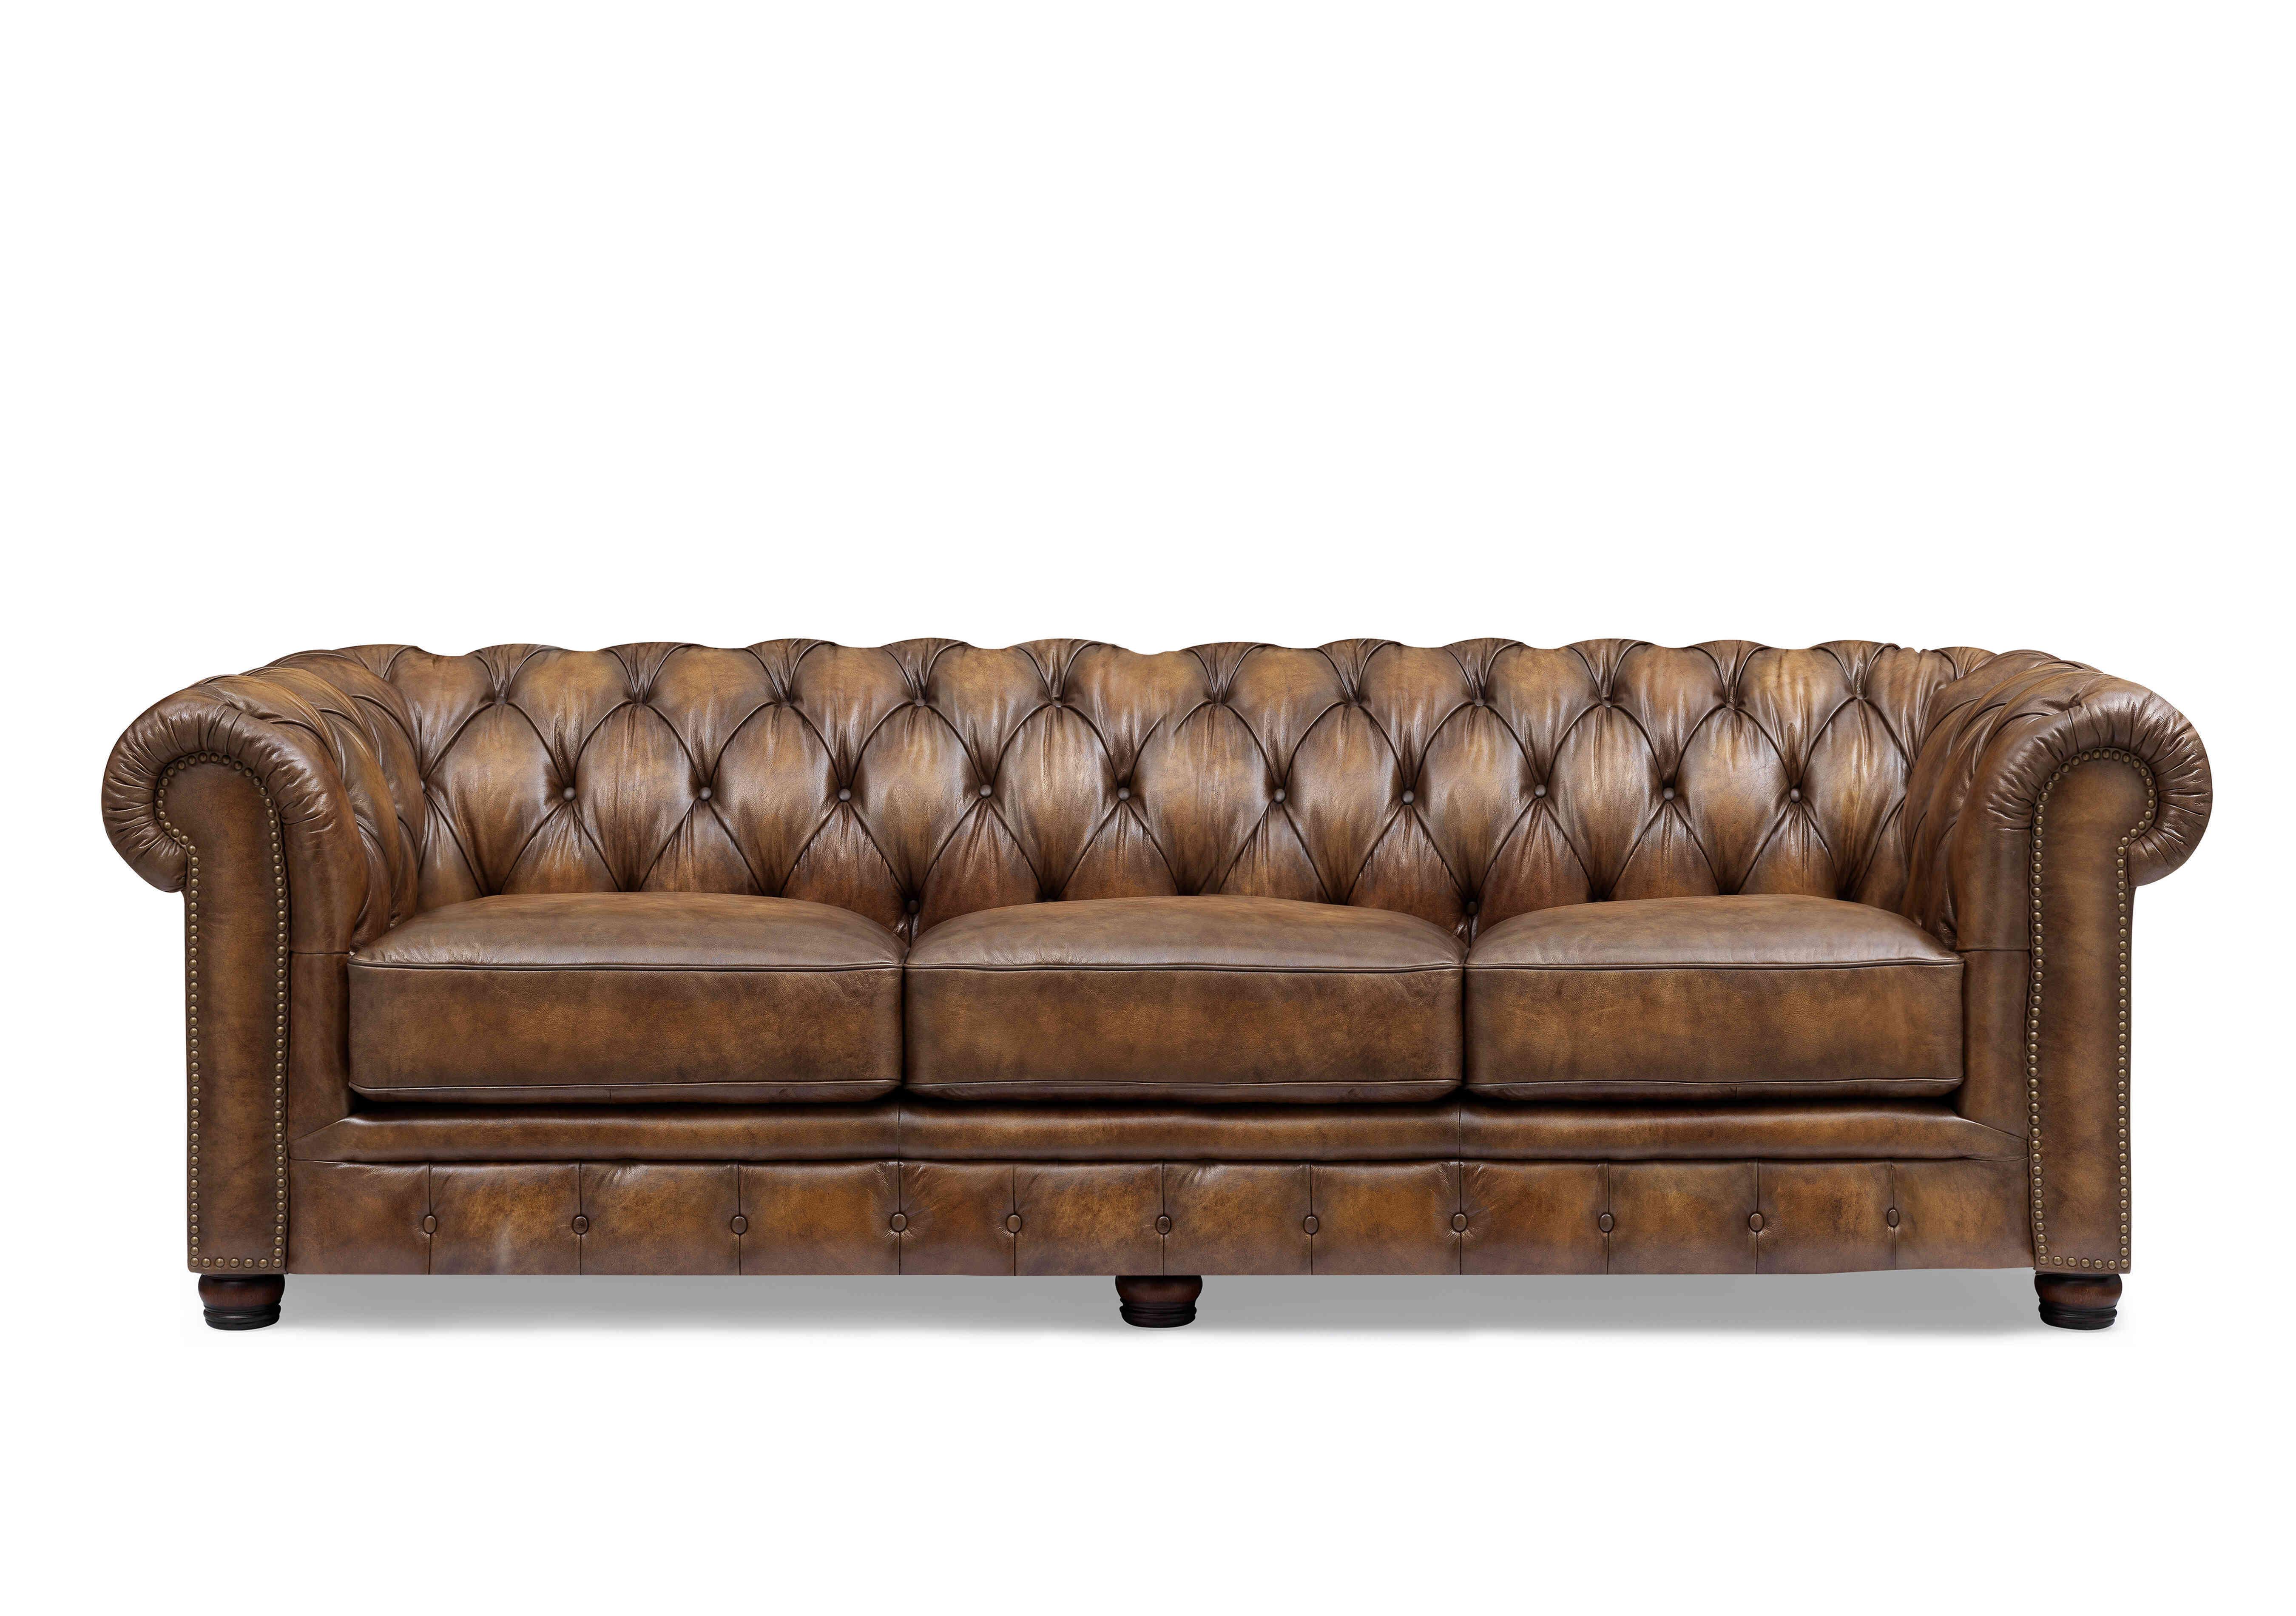 Shackleton 4 Seater Leather Chesterfield Sofa in X3y1-1981ls Saddle on Furniture Village